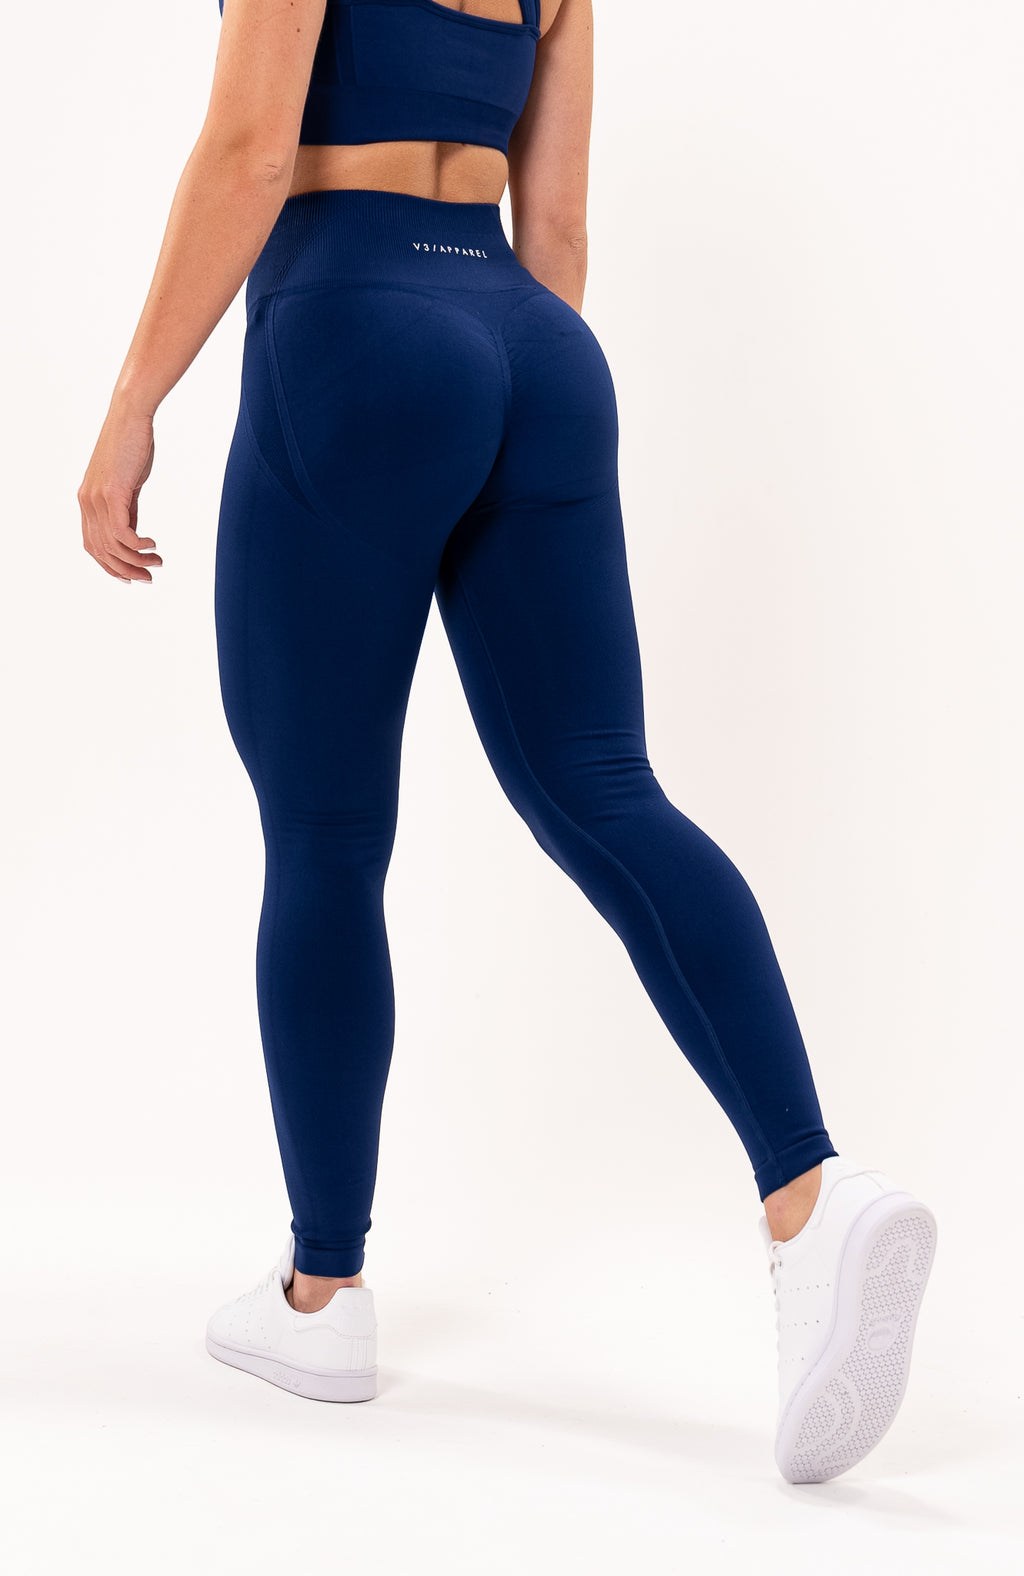 Sexy Seamless Textured Scrunch Bum Leggings Squat Proof HighWaist Yoga Pants  Fitness Outfit Ruched Booty Gym